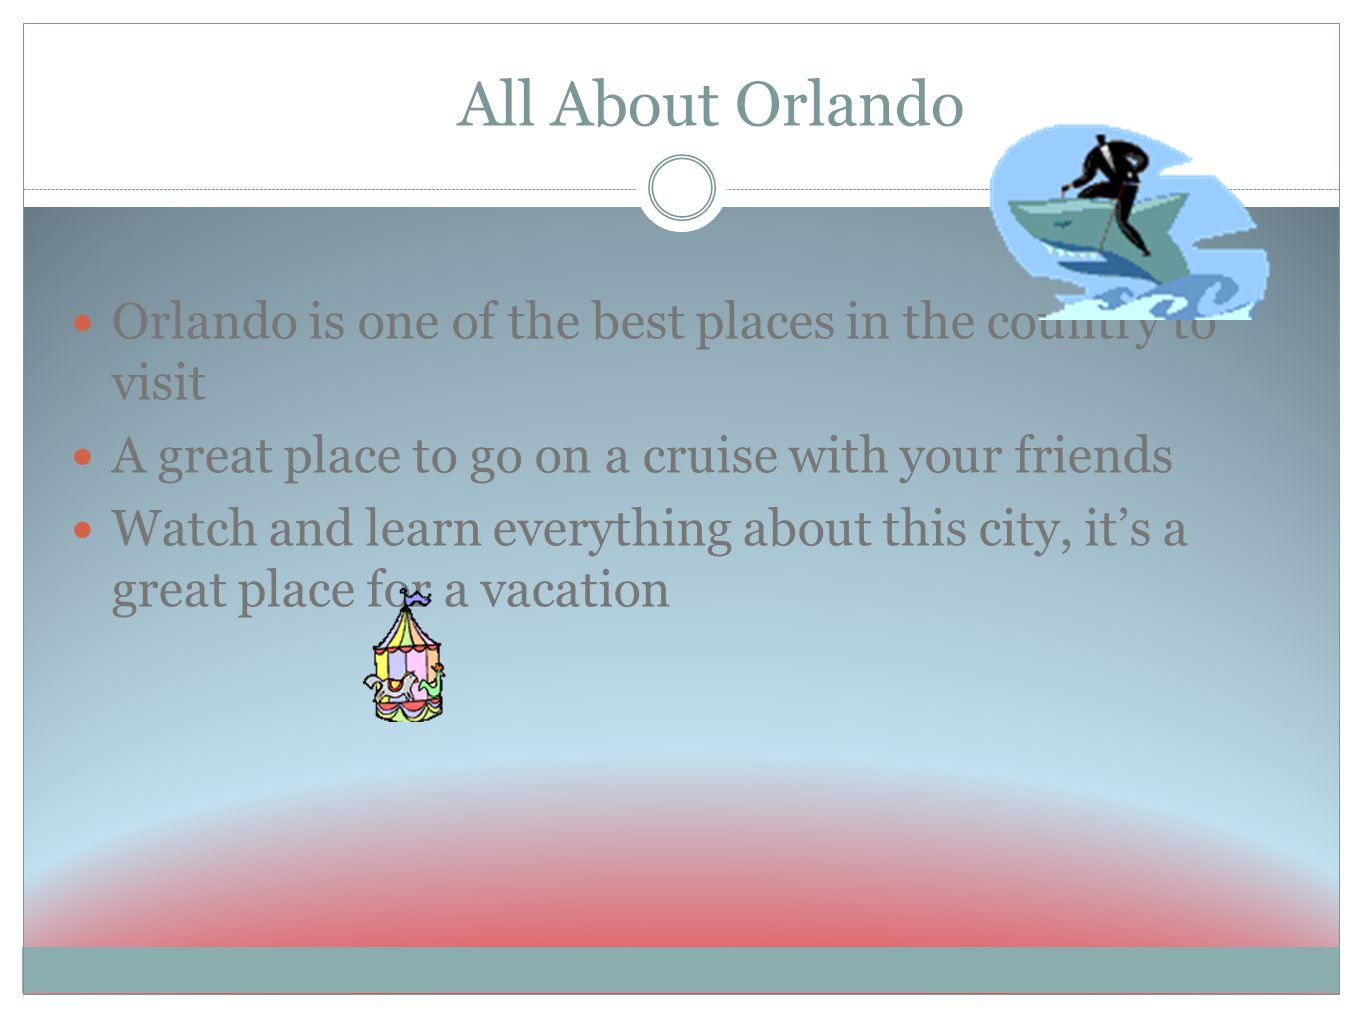 All About Orlando Orlando is one of the best places in the country to visit A great place to go on a cruise with your friends Watch and learn everything about this city, it’s a great place for a vacation